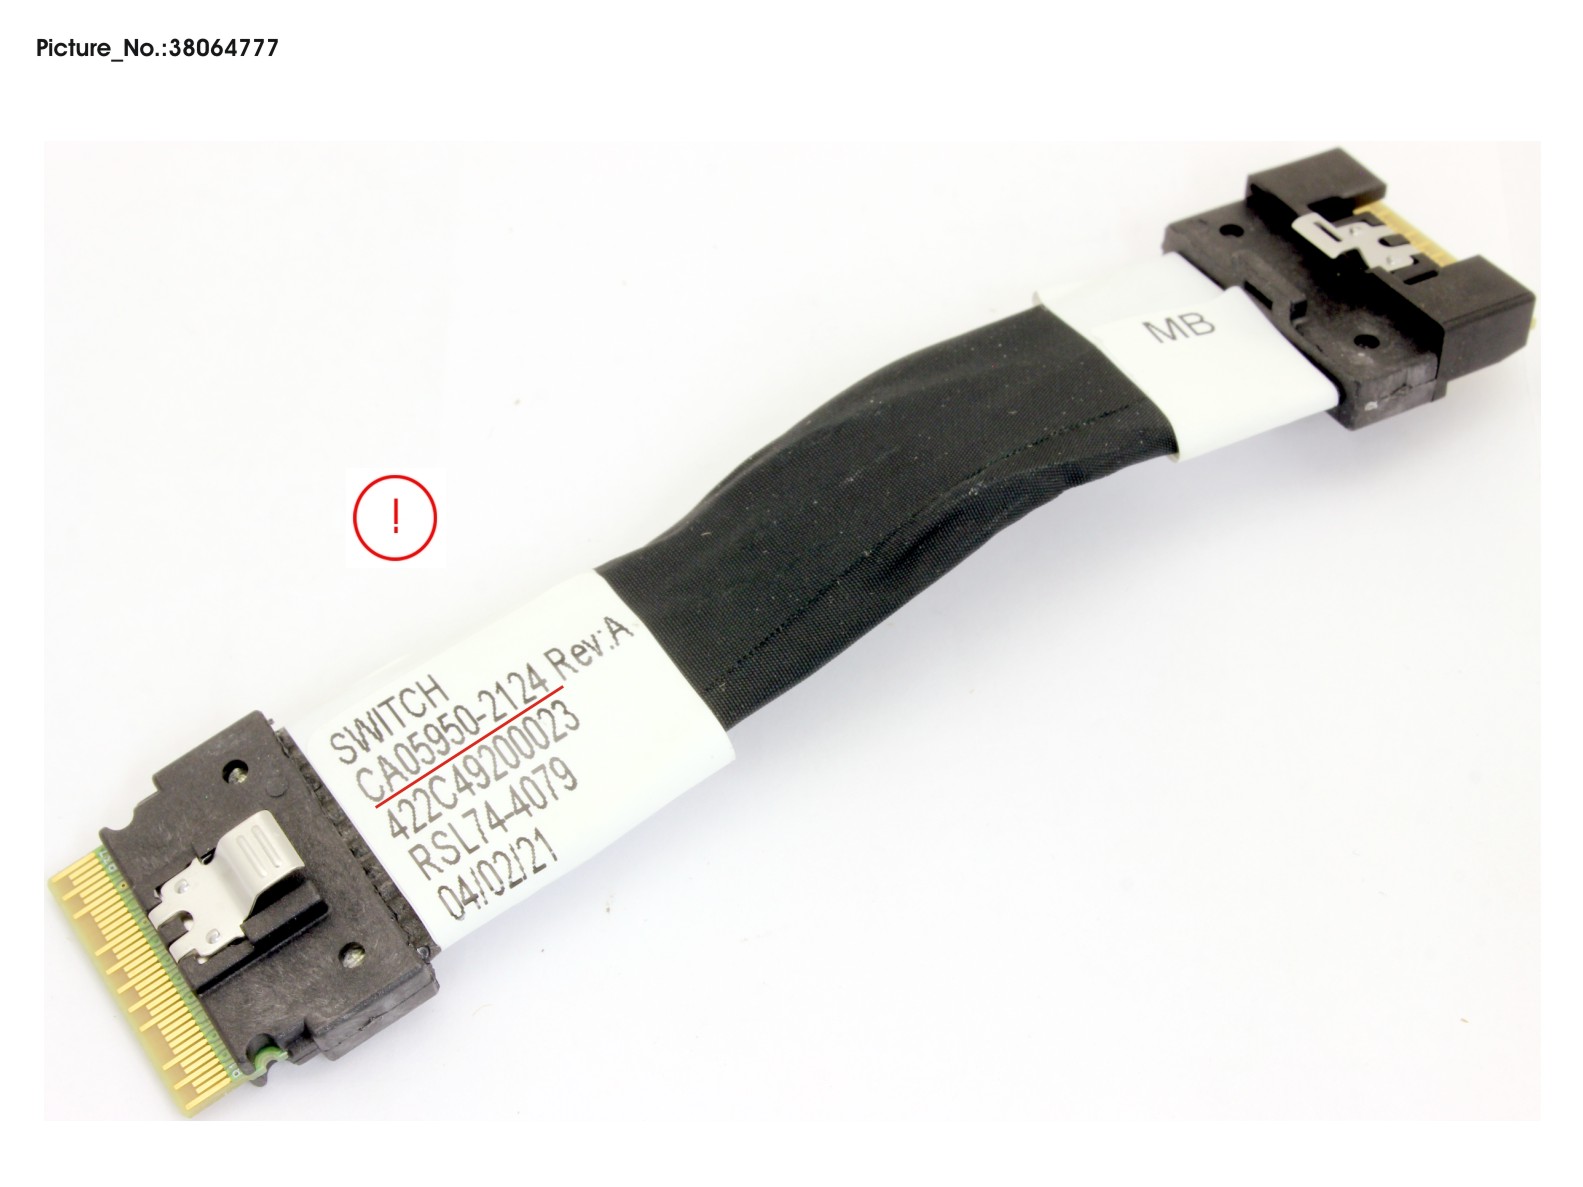 DATA MB TO SWITCH BD CABLE (MB - SW BOAR